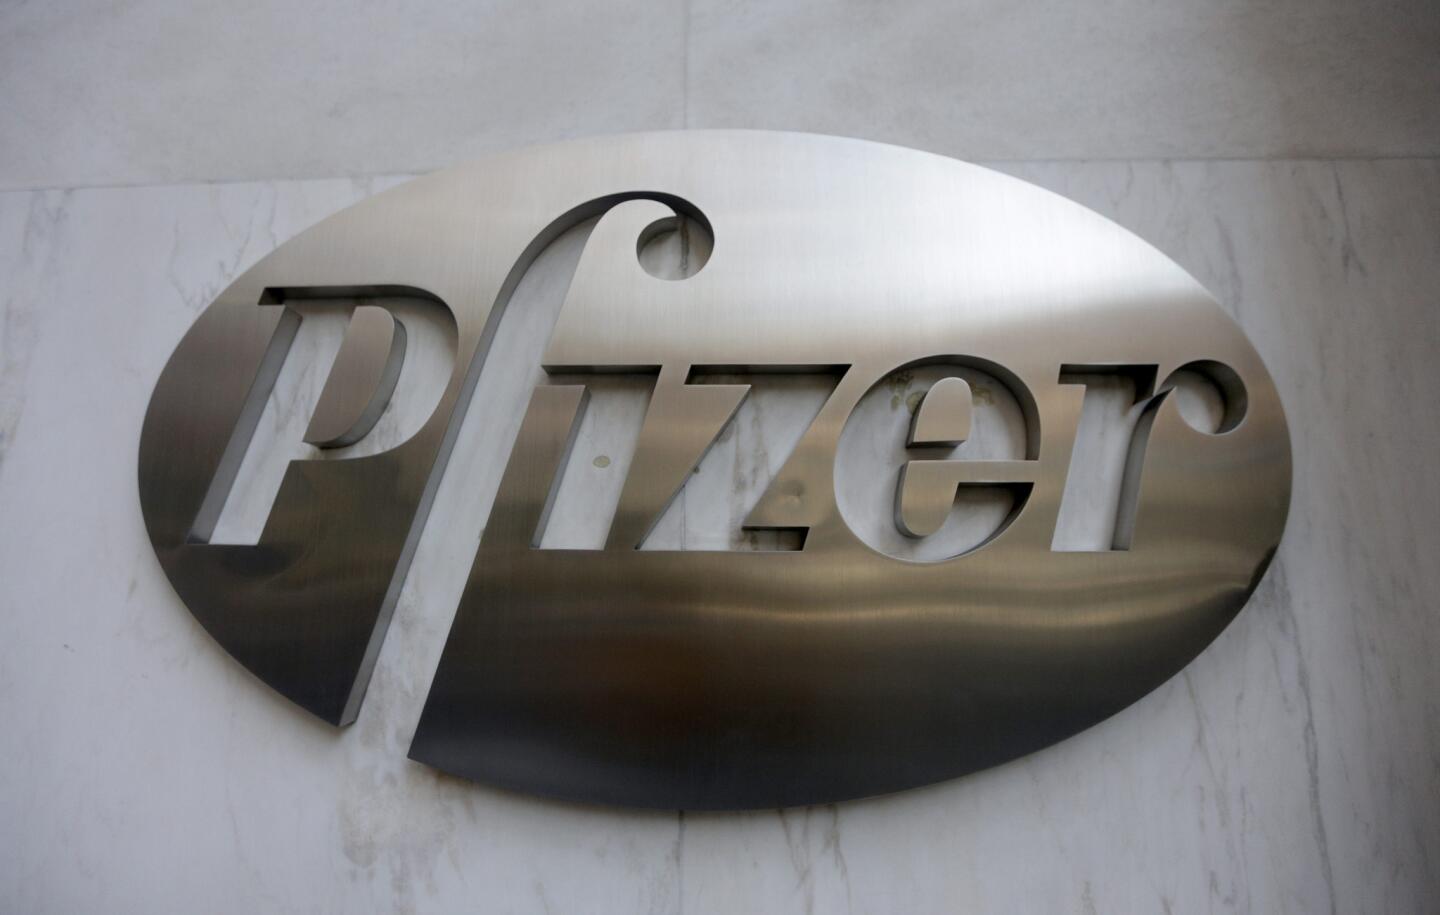 The deal would create the world's largest drug company, bringing Pfizer's erectile dysfunction drug Viagra and Allergan's wrinkle treatment Botox under one company. Value: $148.6 billion Announced: November Status: Pending